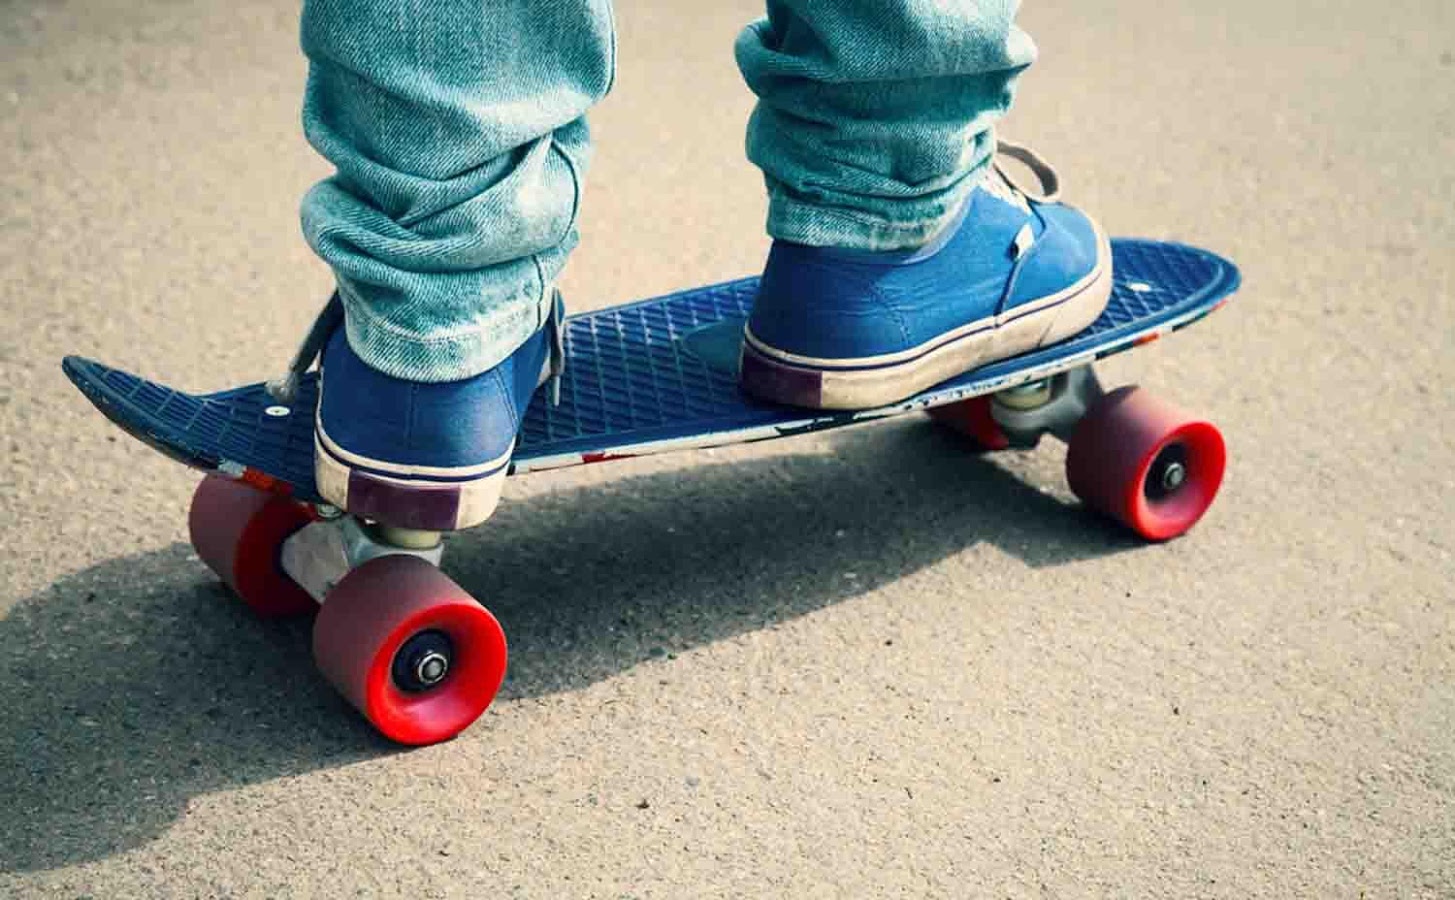 Skateboard Wallpaper - Android Apps on Google Play